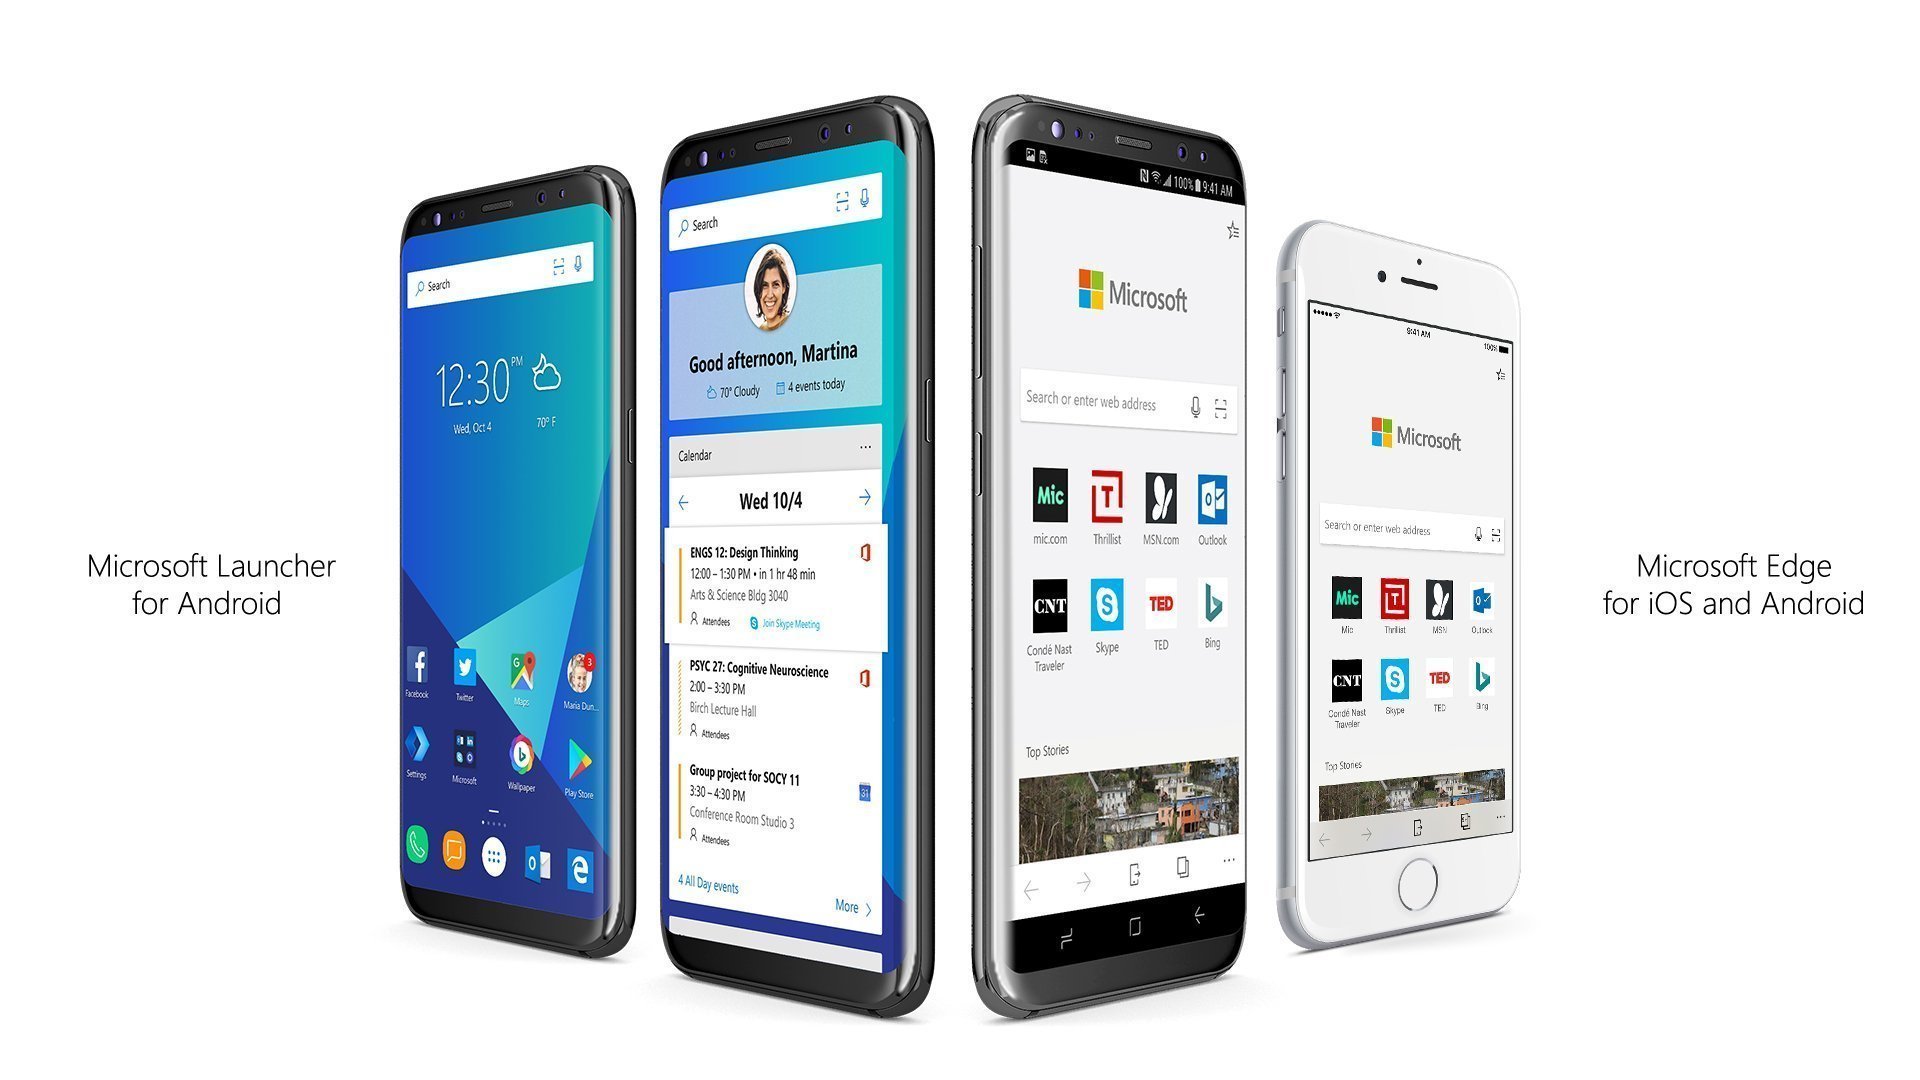 Microsoft Launcher’s new update brings Windows 10 Timeline to phones caaf609f6273fcc3e9545708498dcded.jpg